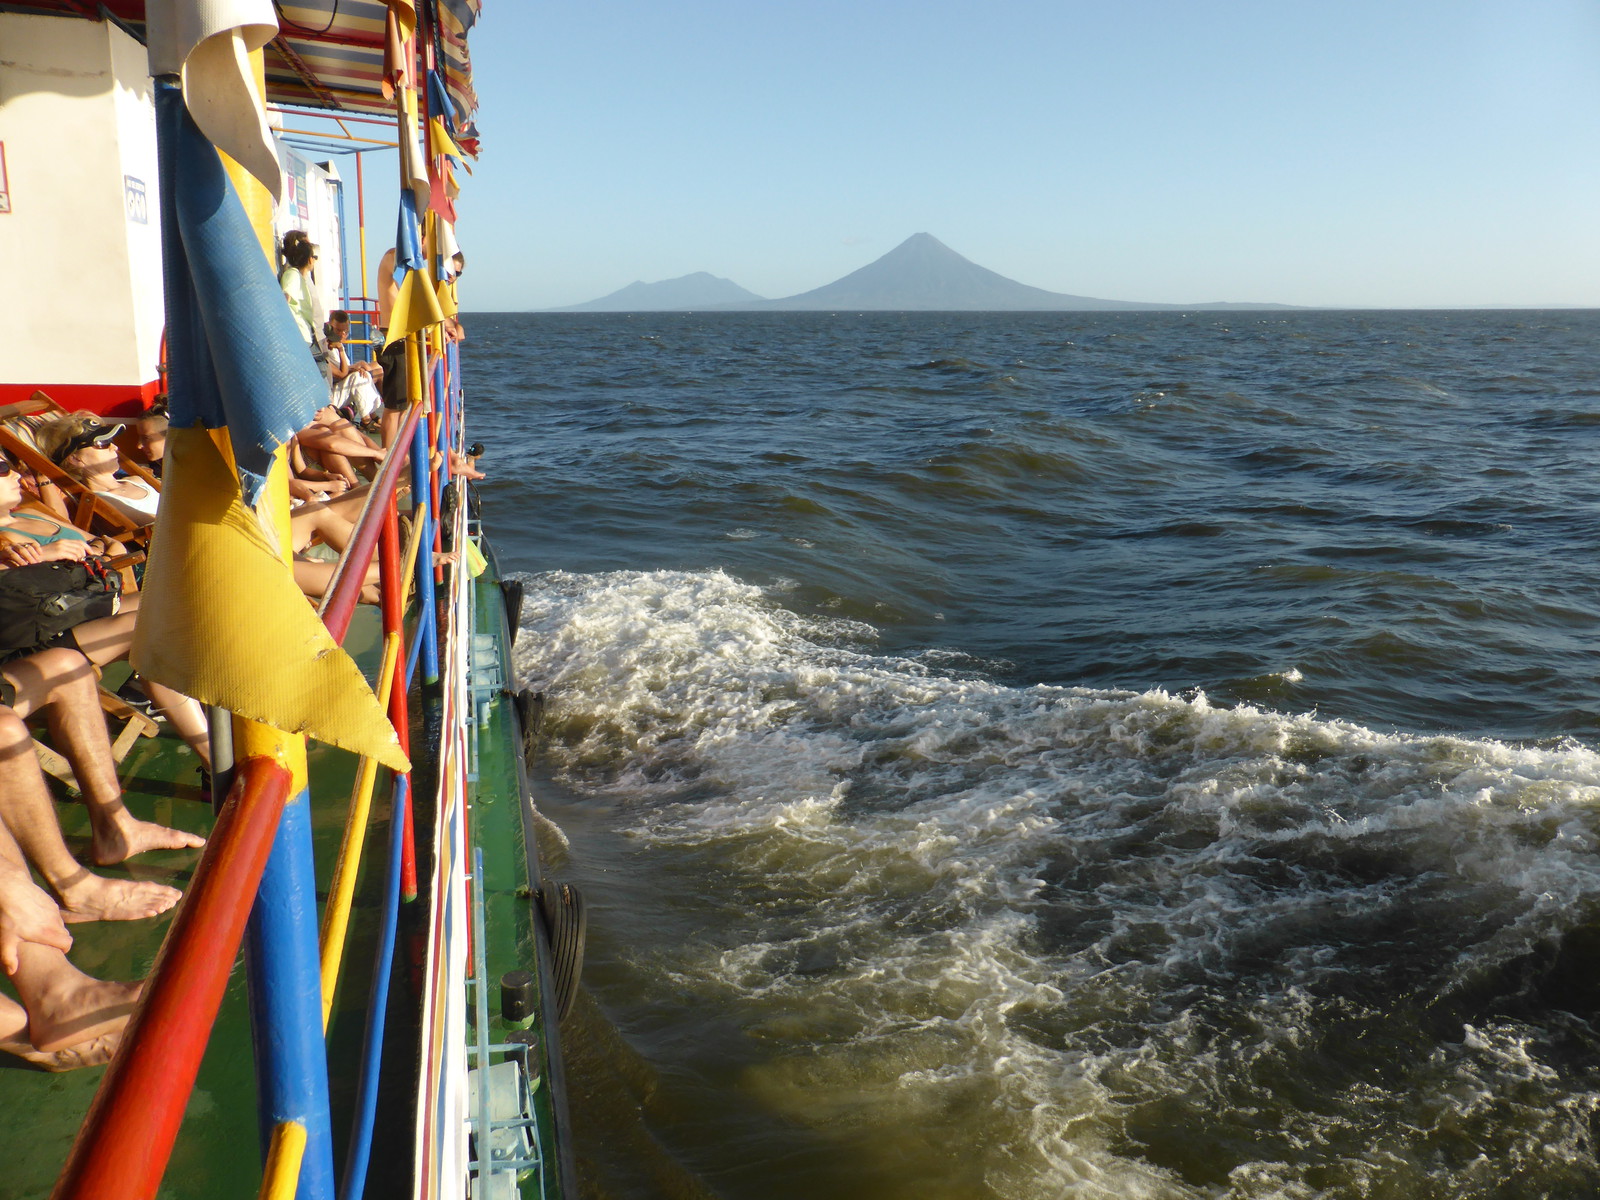 We had a great view of Ometepe from the starboard deck